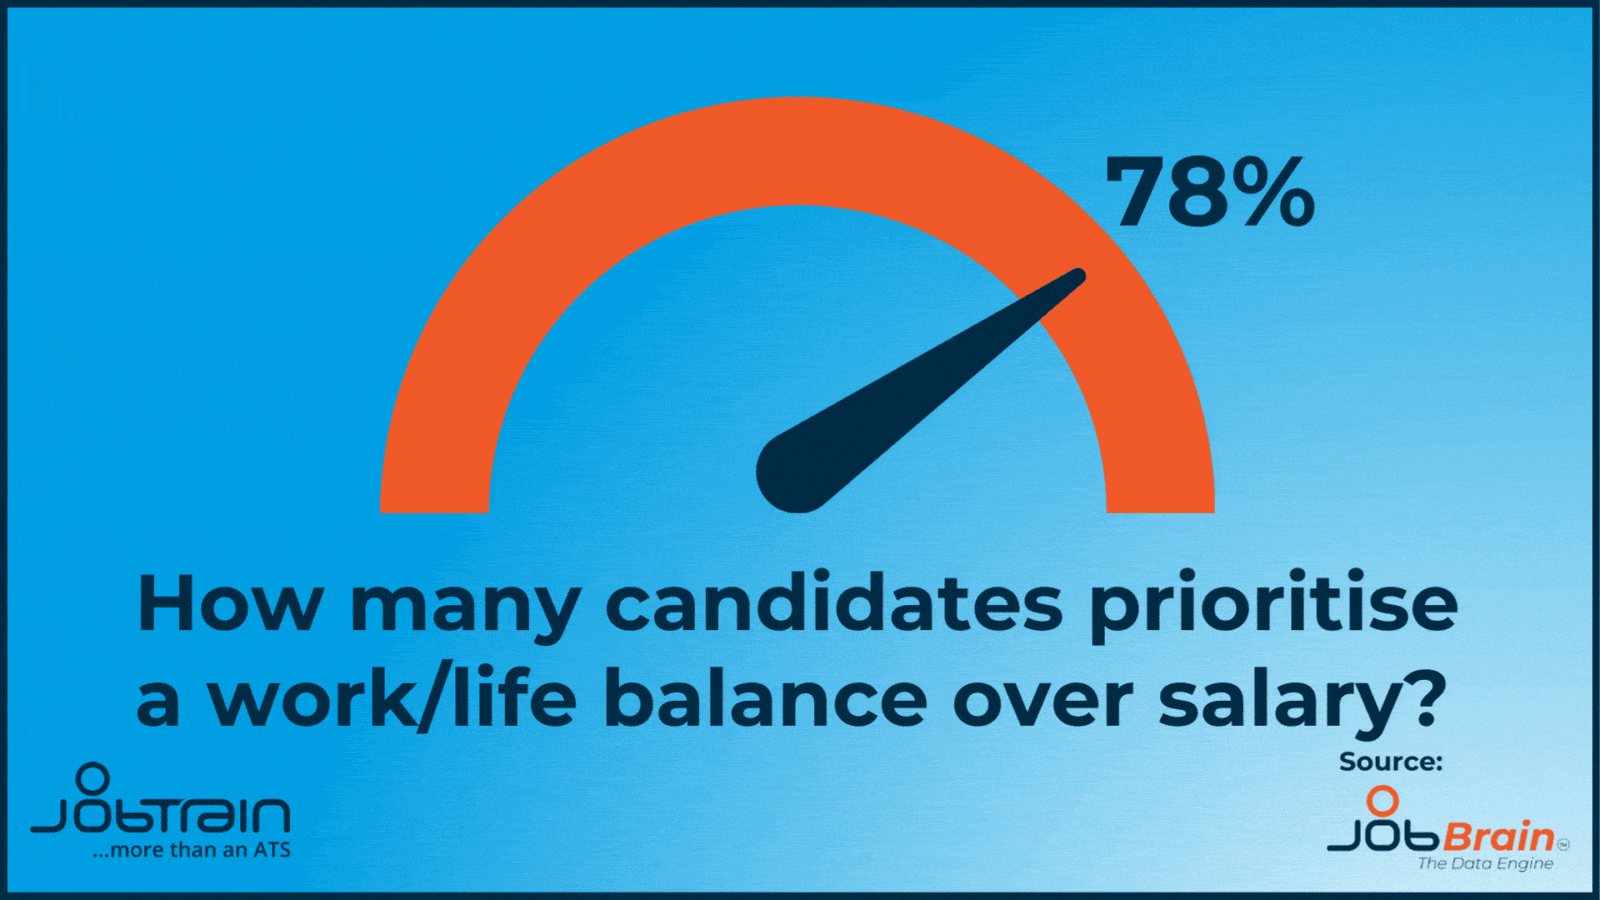 How many candidates prioritise a work/life balance over salary?